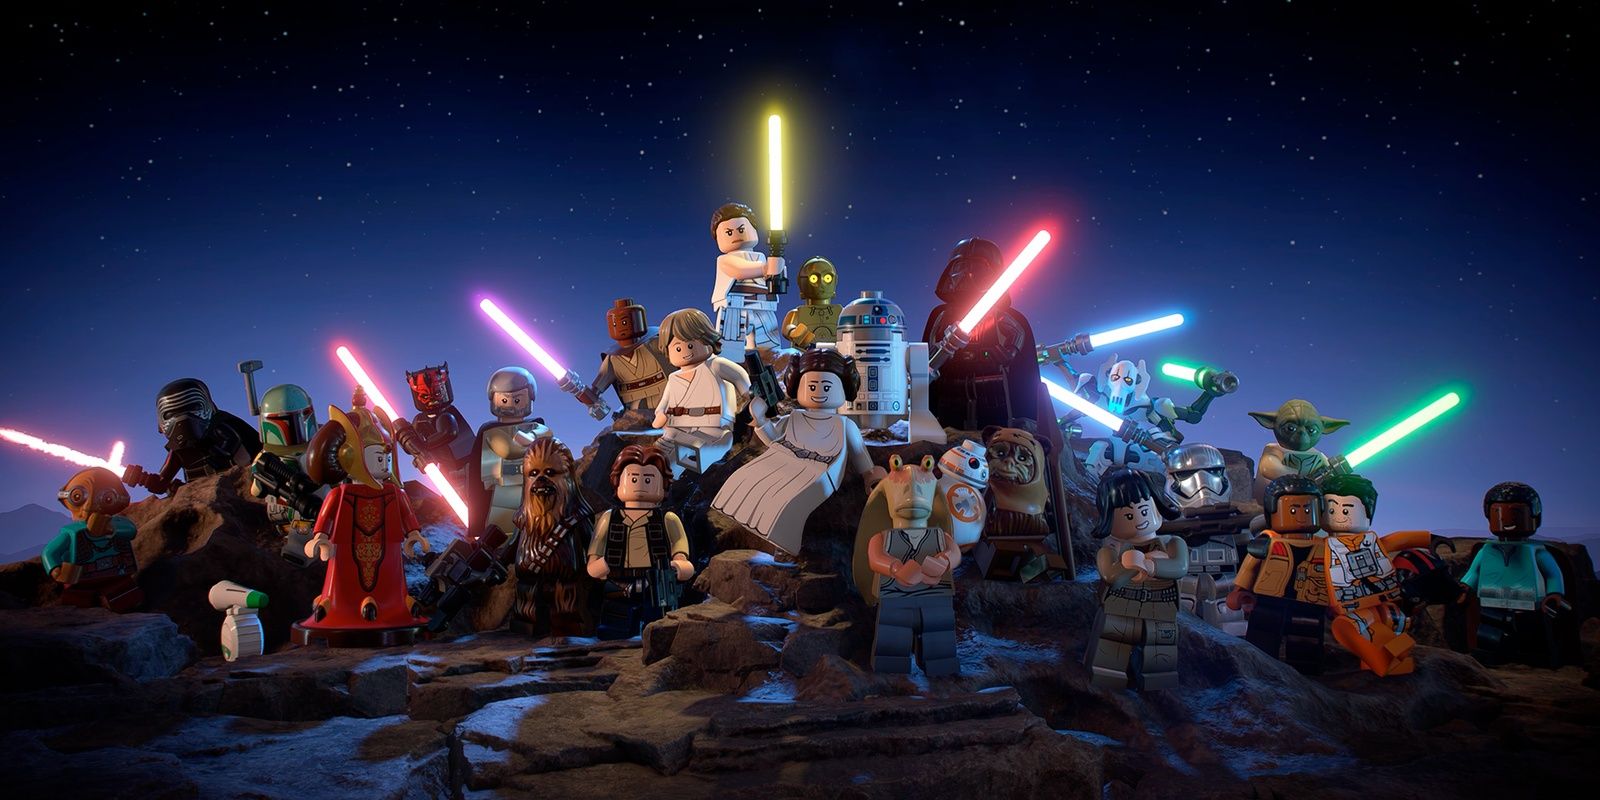 Multiple characters from the Star Wars franchise in Lego form stand together on a rocky hill with the night sky behind them